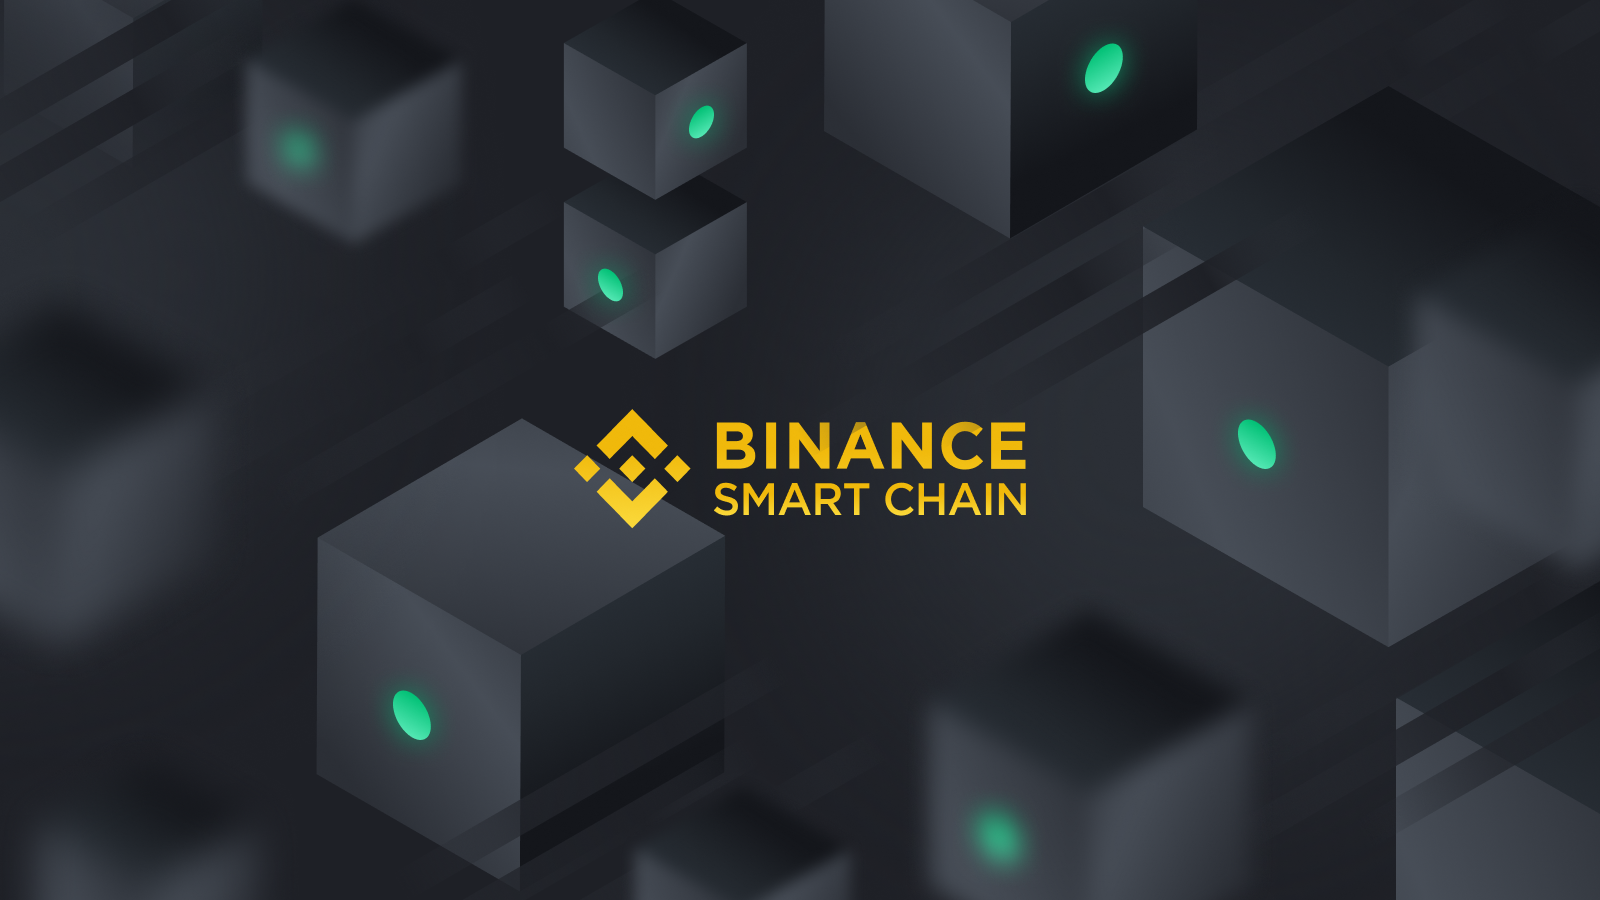 This is a picture of the Binance Smart Chain